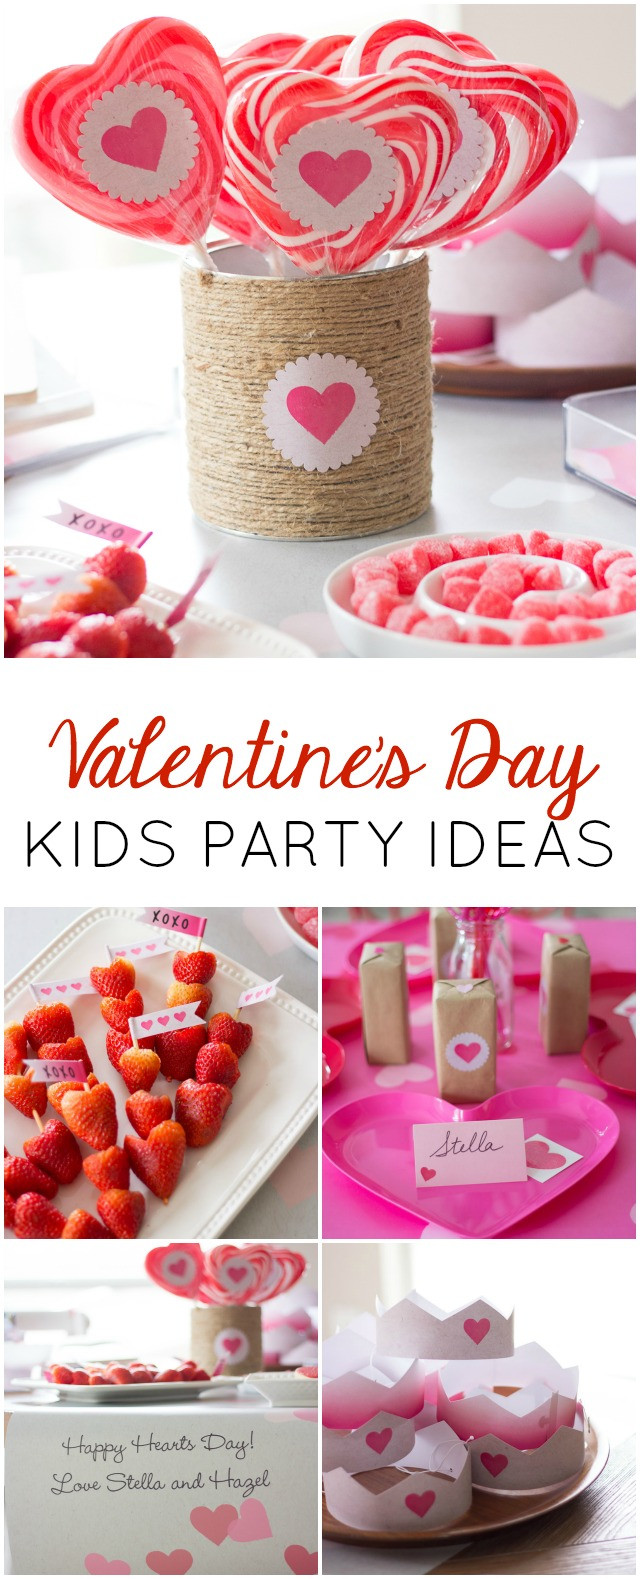 Valentine Party Ideas For Kids
 A Heart Filled Valentines Party